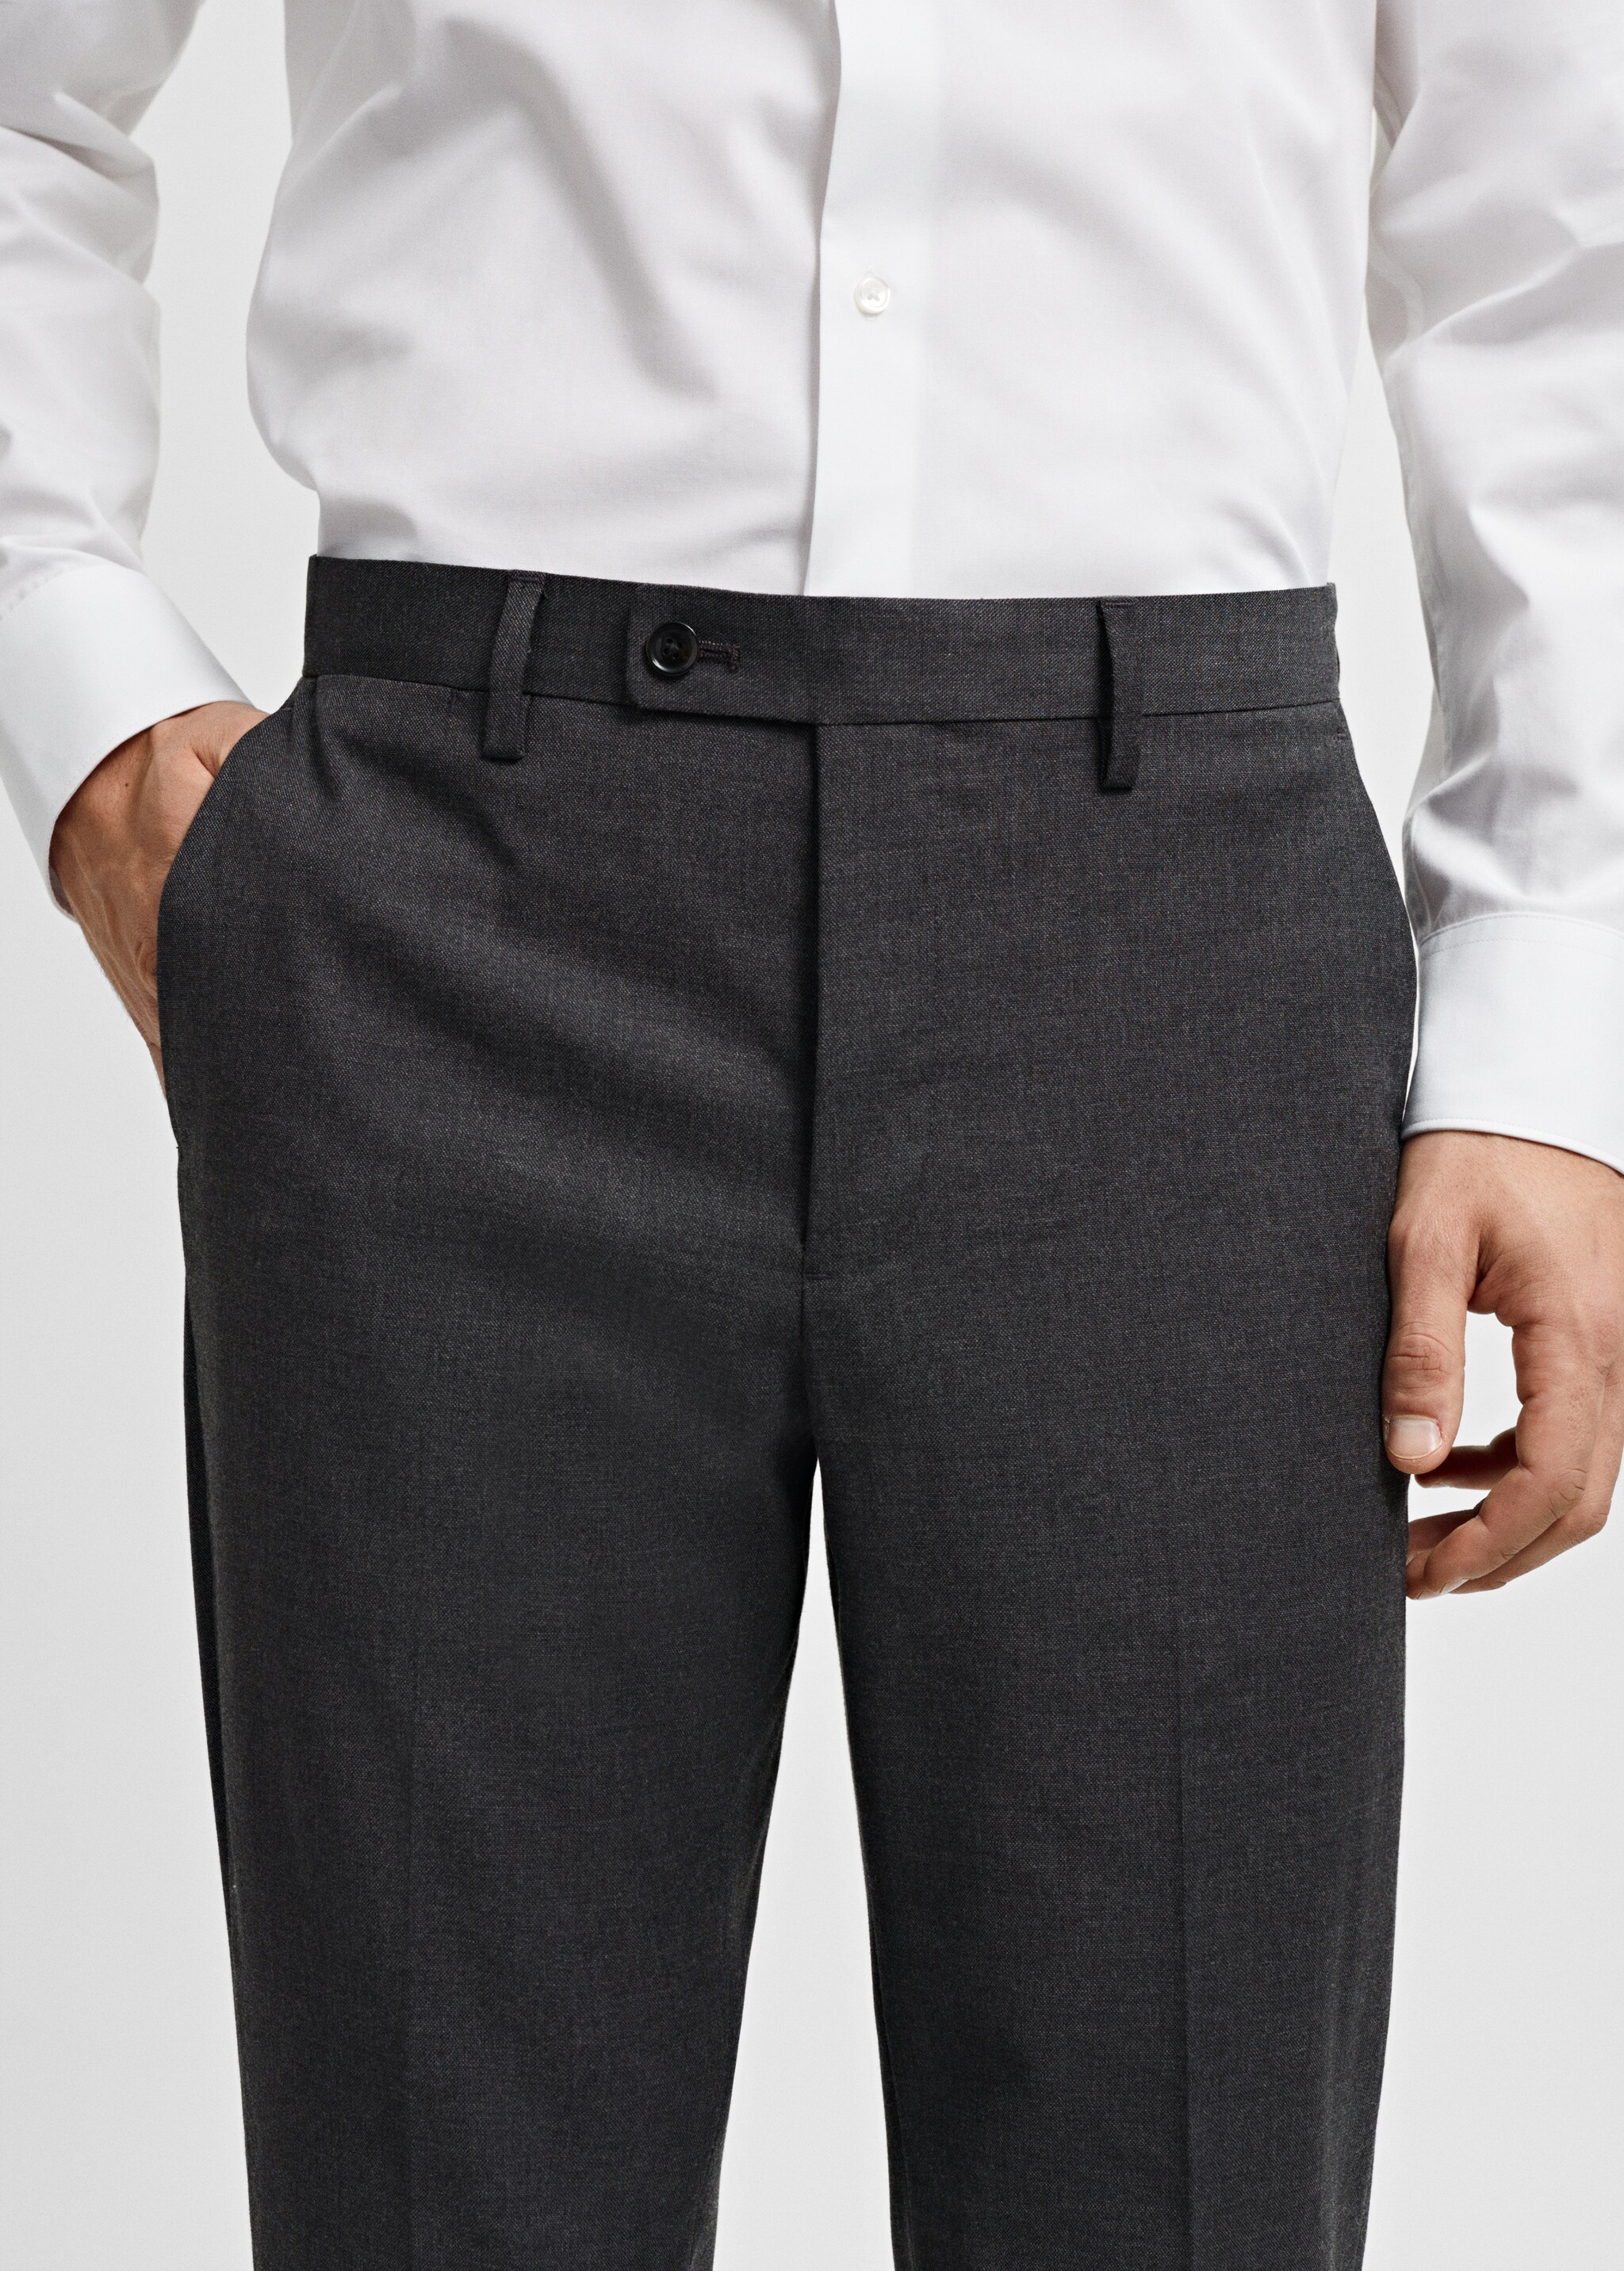  Suit trousers - Details of the article 1